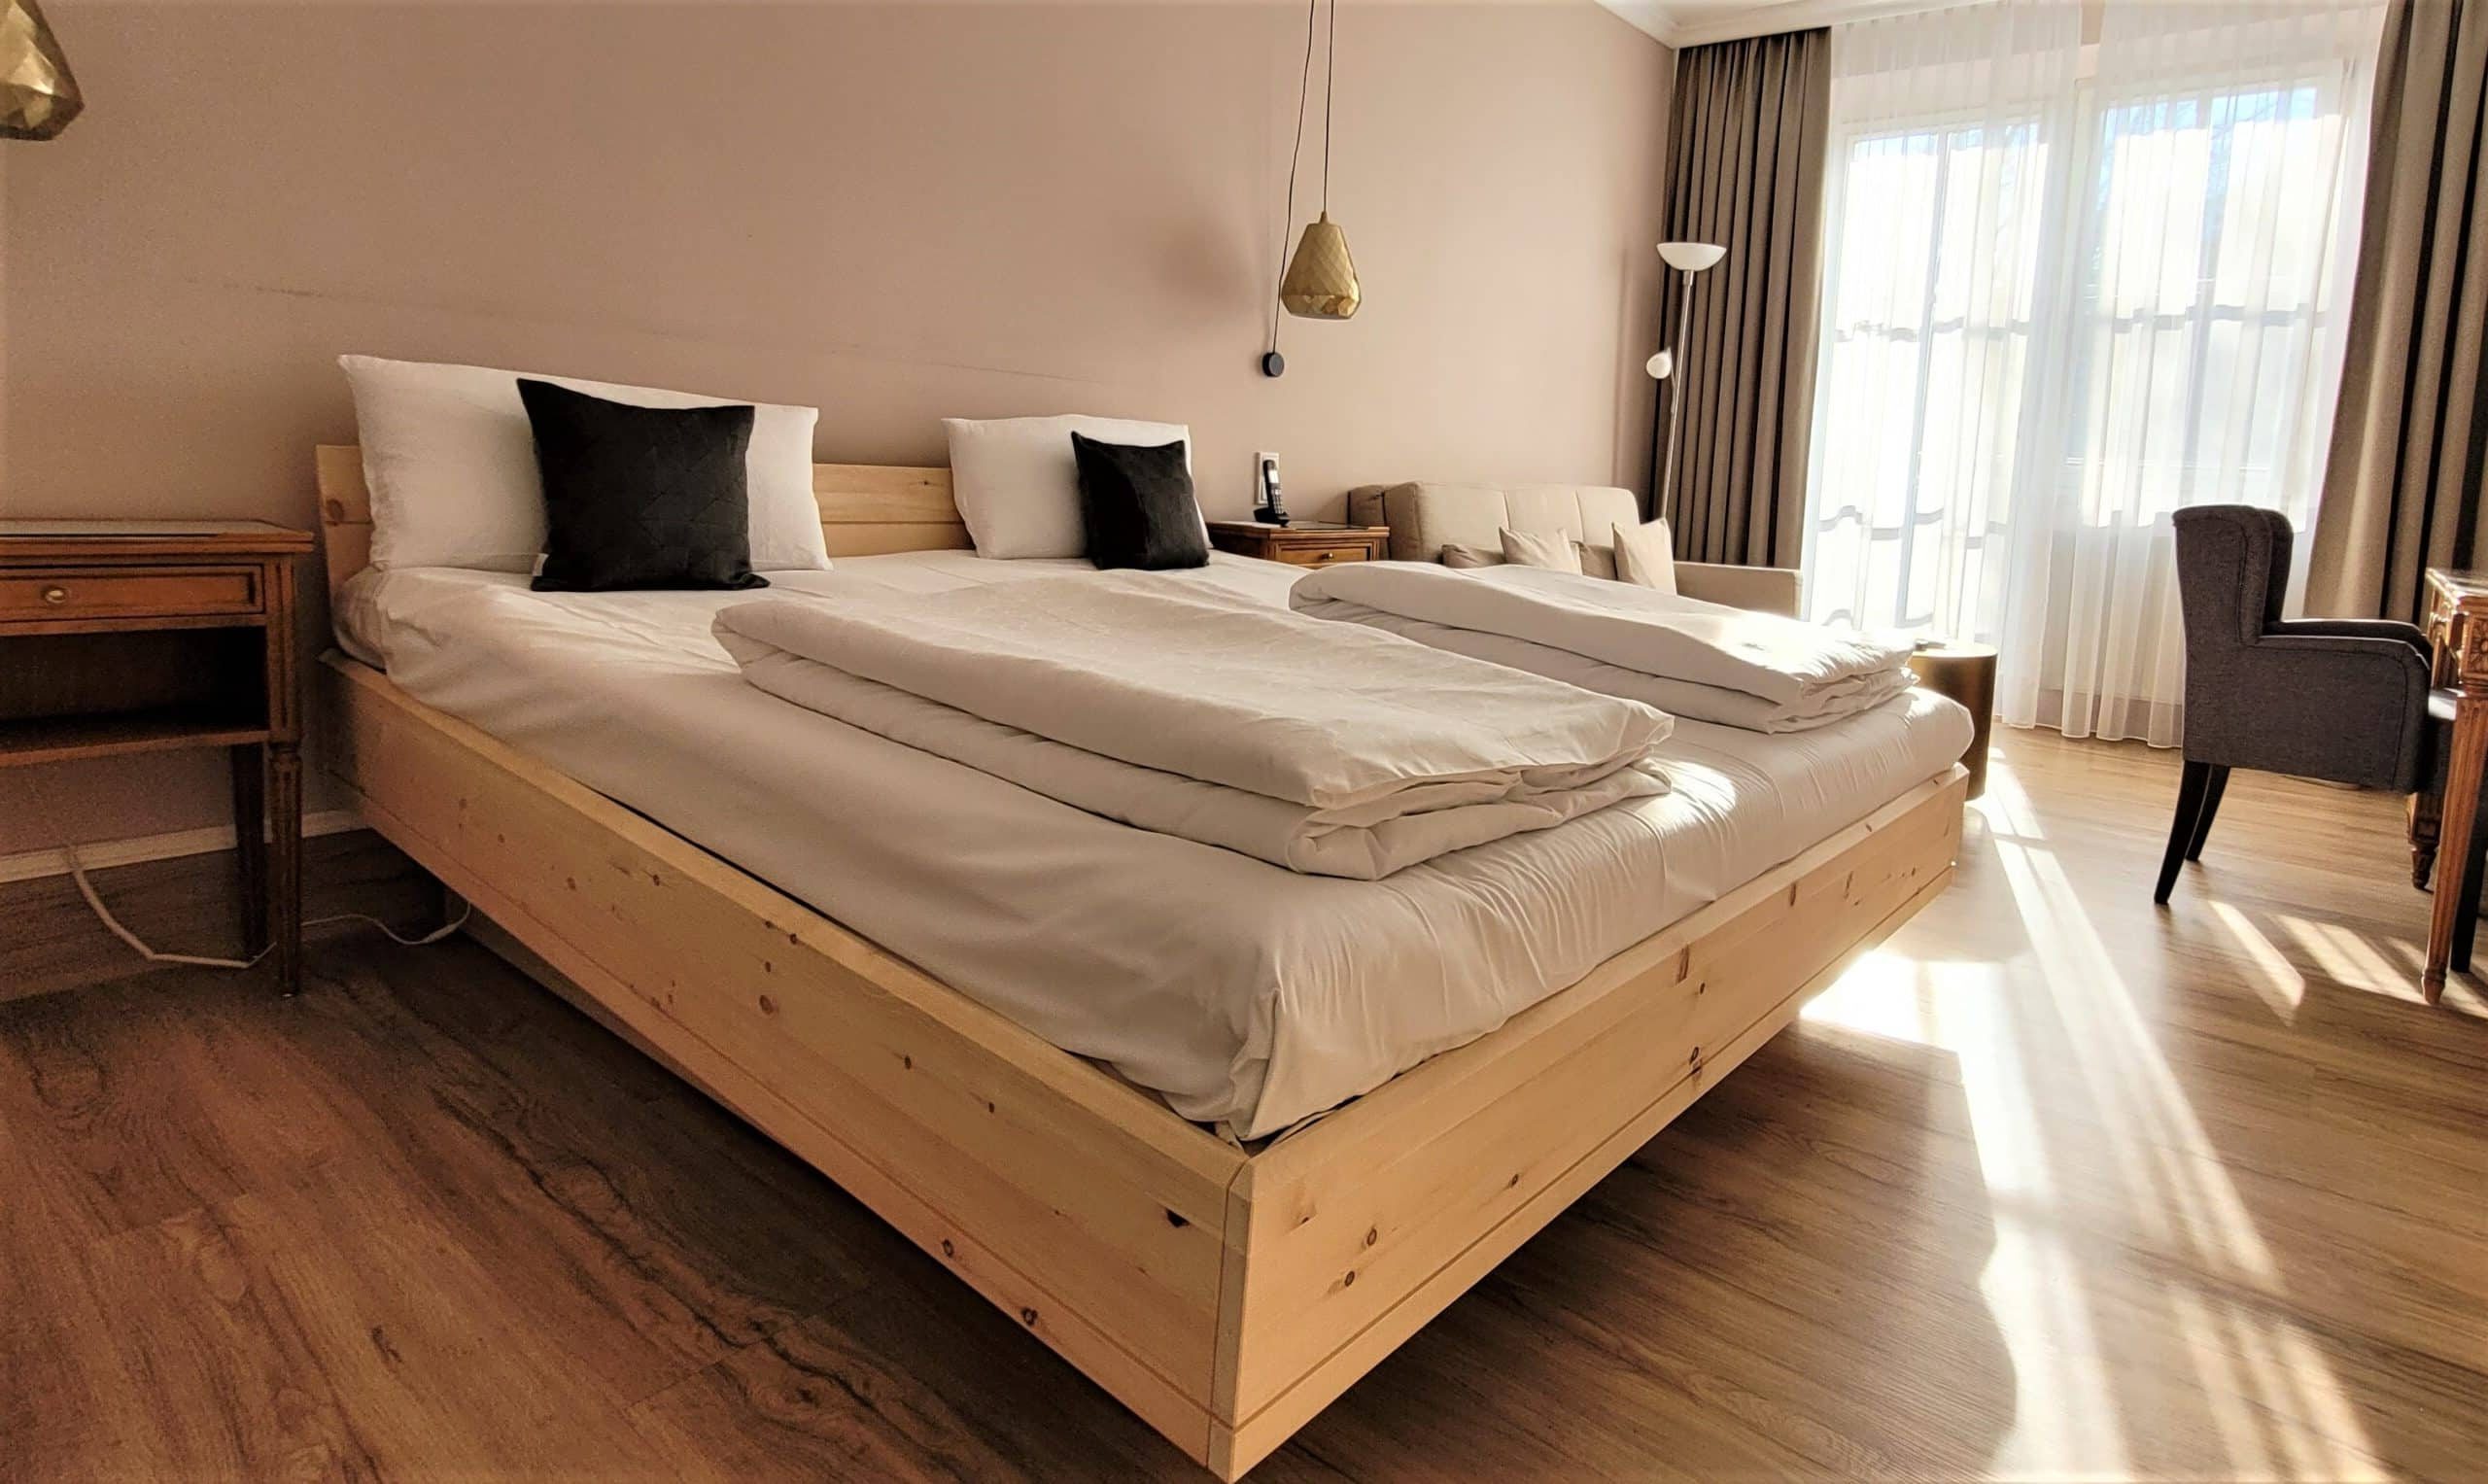 Adriano bed frame in untreated pine wood with two single duvets folded on top